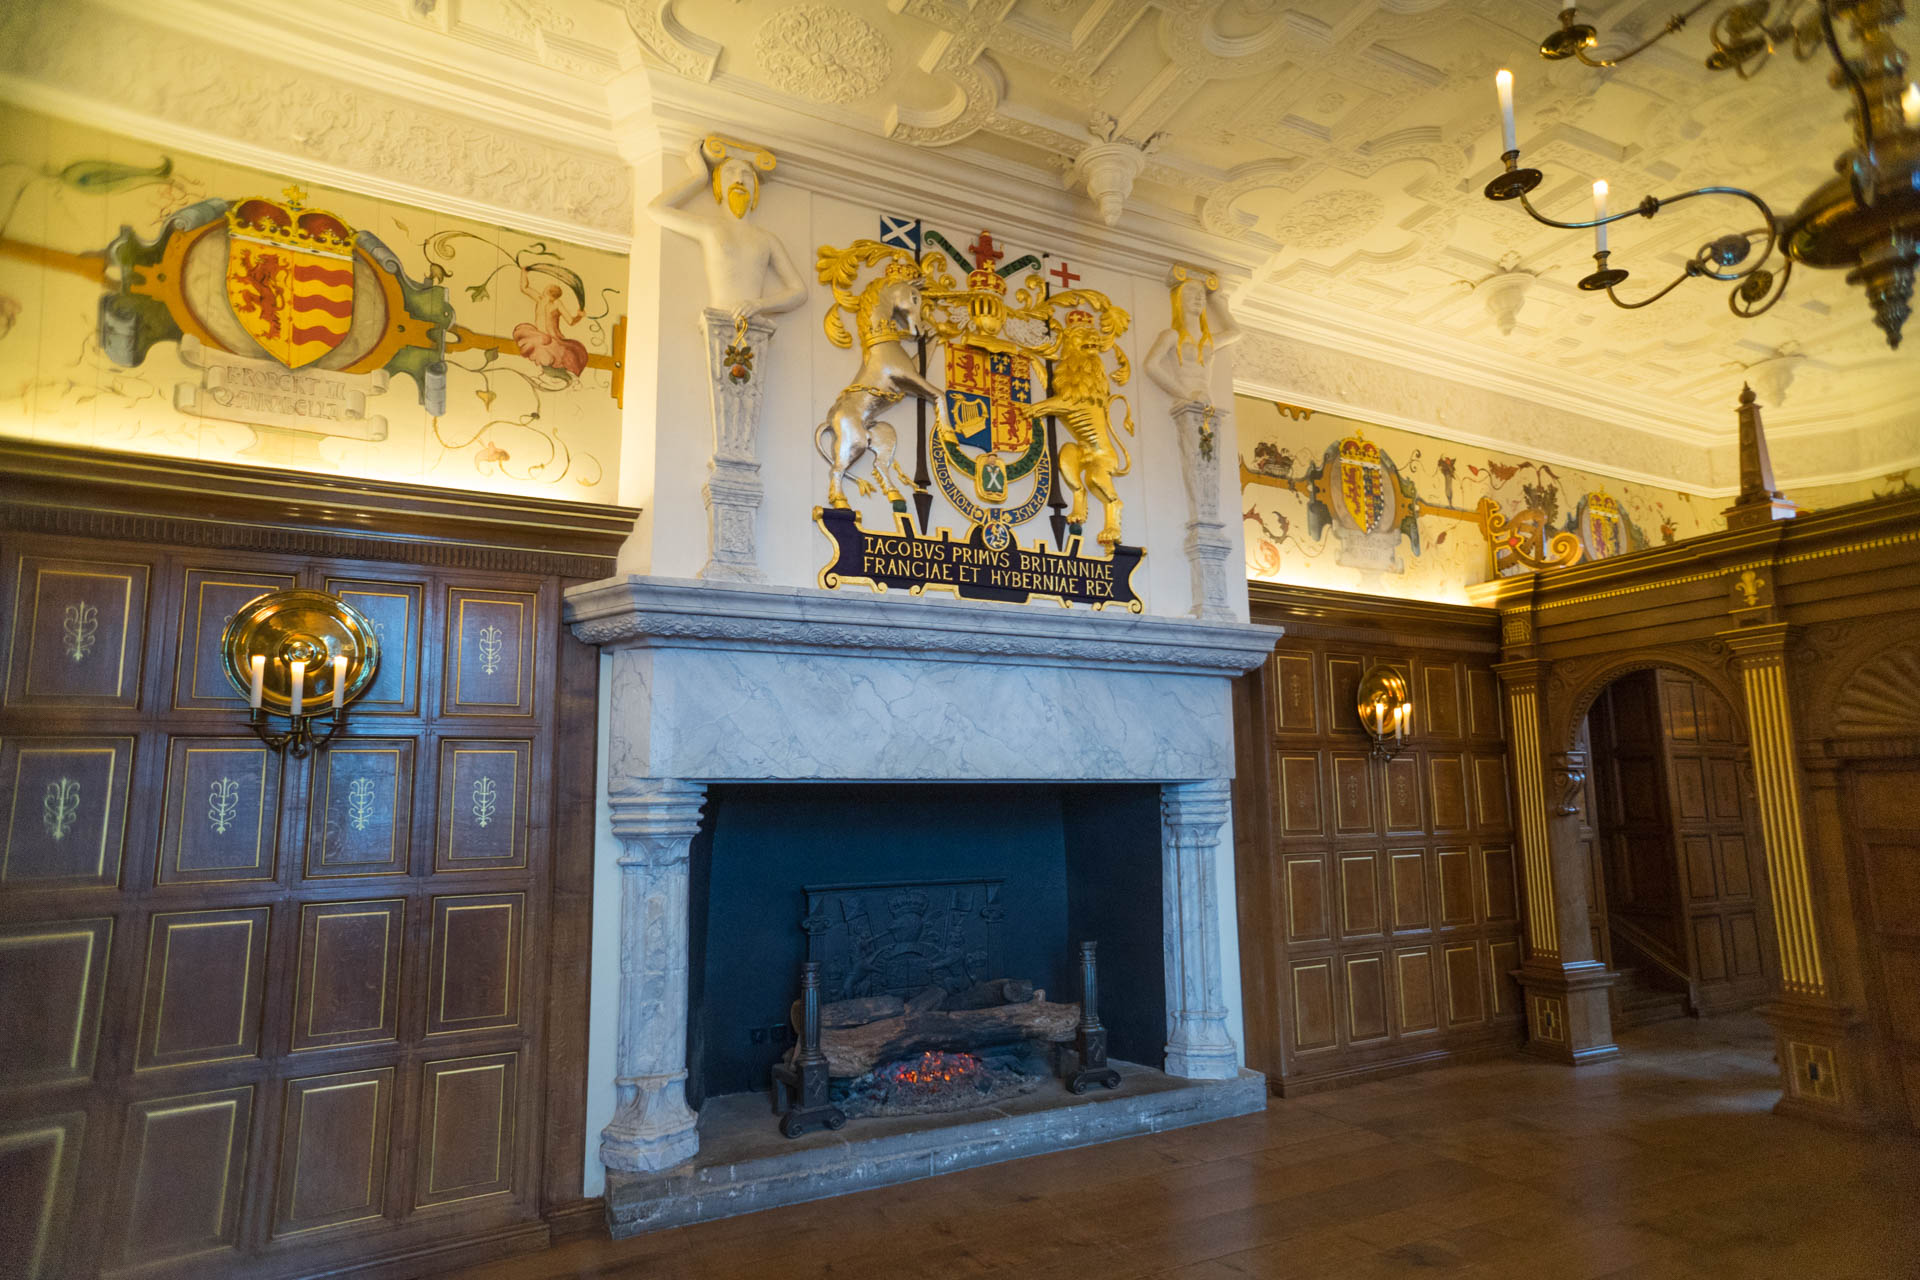 a large fireplace sits in a large room